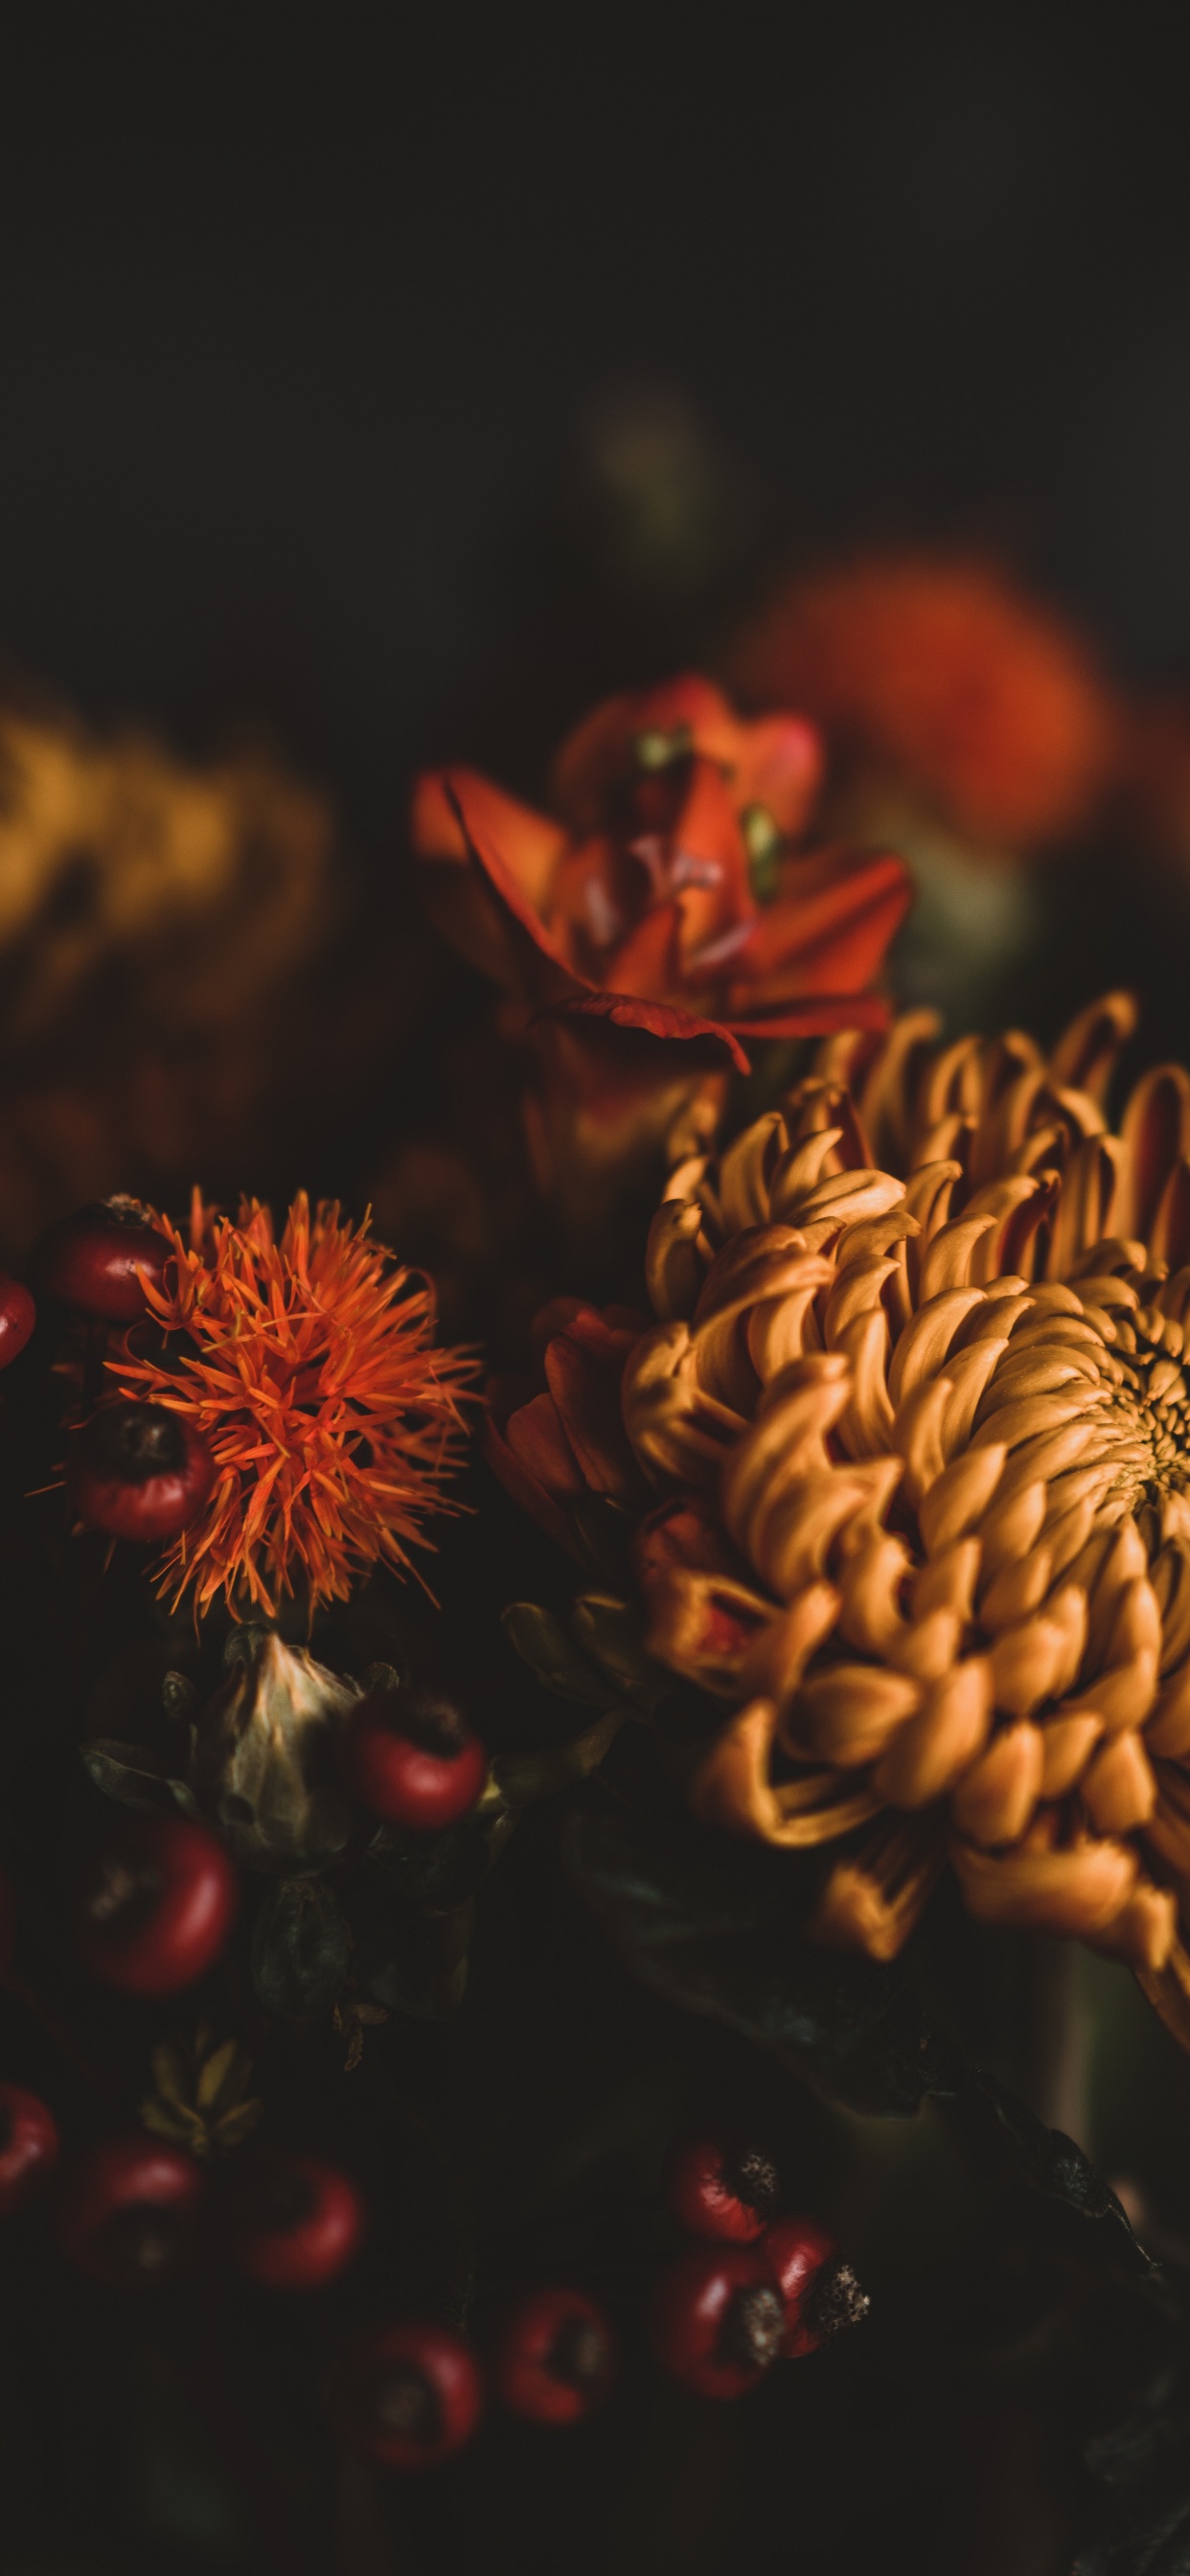 Brown and Red Flower in Close up Photography. Wallpaper in 1242x2688 Resolution